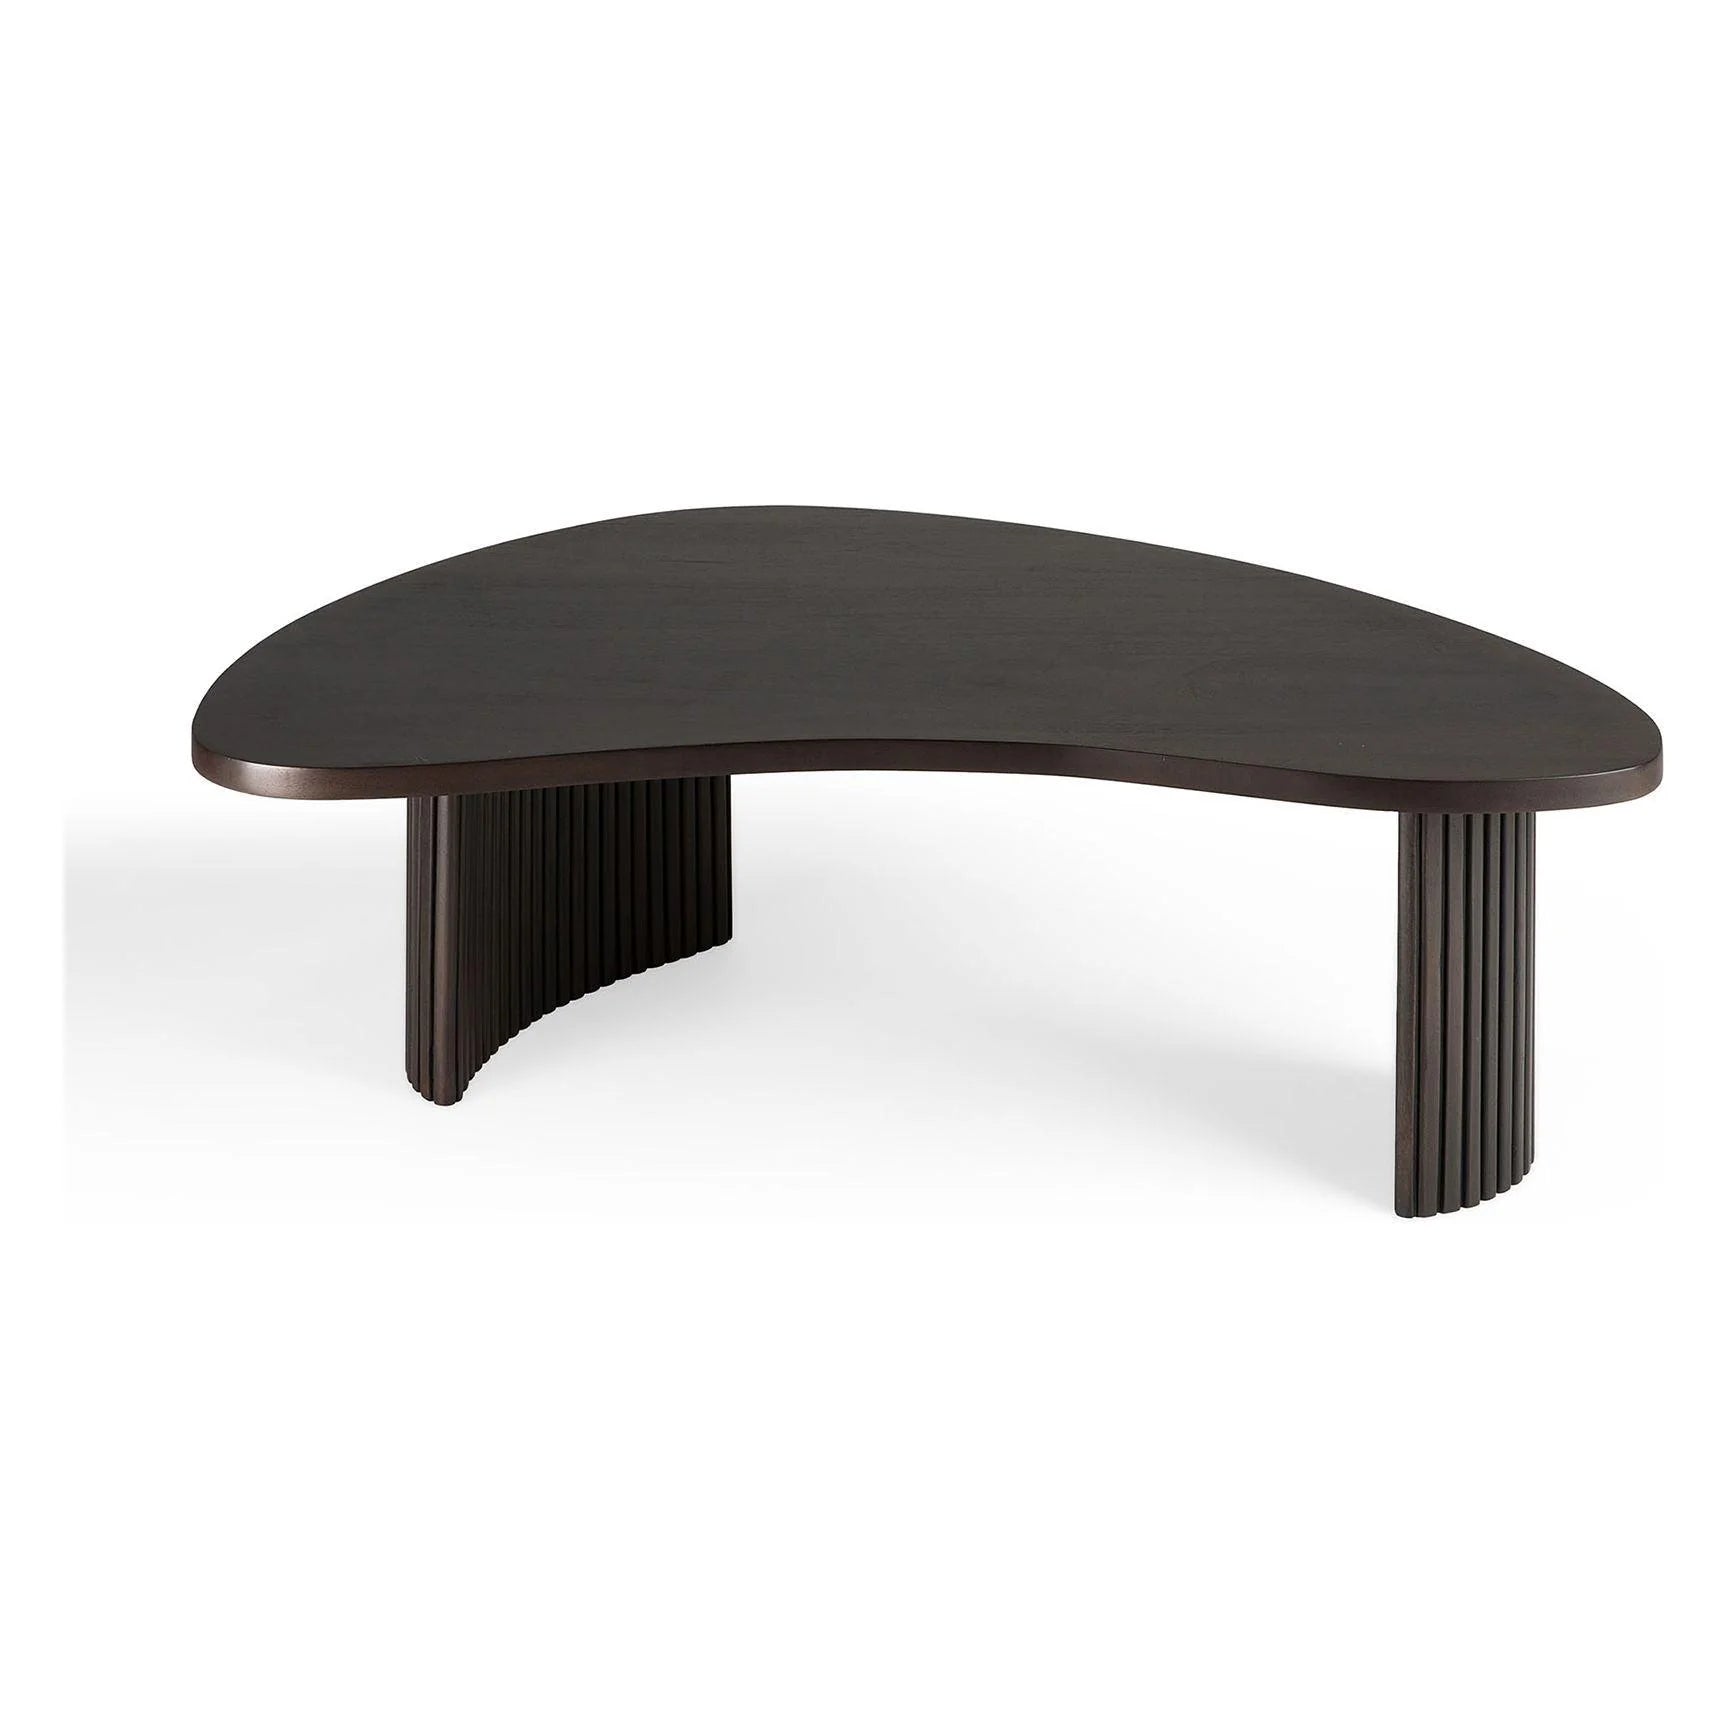 Ethnicraft Boomerang Mahogany Coffee Tables available from Make Your House A Home, Bendigo, Victoria, Australia